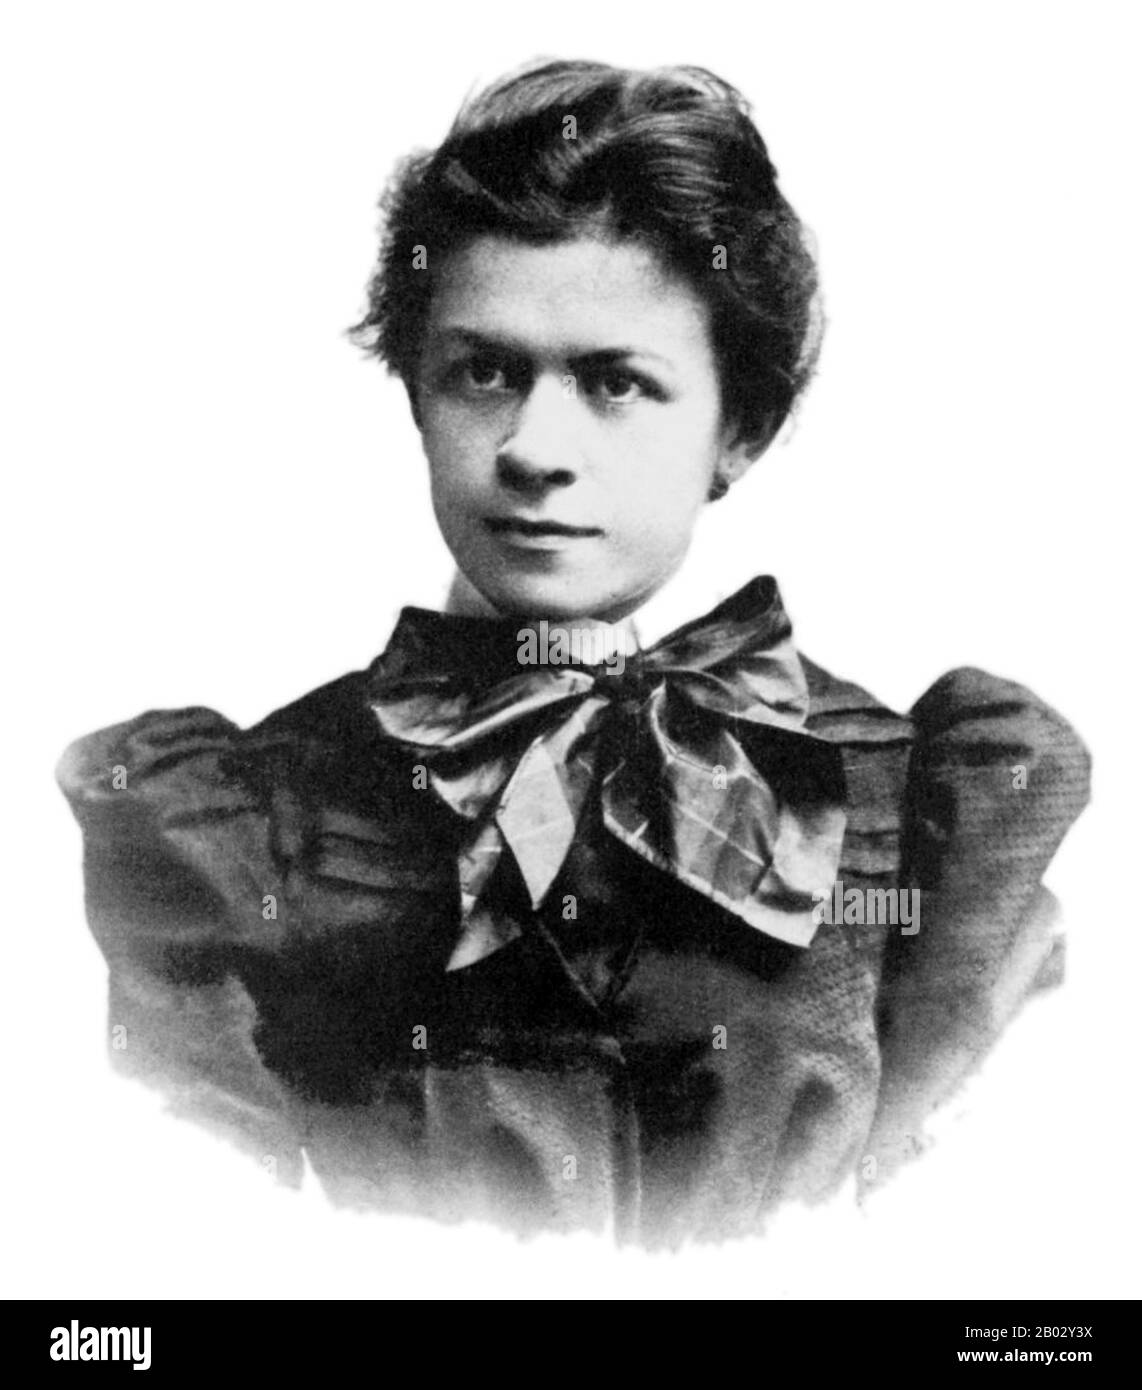 Mileva Maric (December 19, 1875 – August 4, 1948) was a Serbian physicist. She was the only woman among Albert Einstein's fellow students at the Zurich Polytechnic. They developed a relationship and had a daughter before their marriage, Lieserl, who either died young or was given up for adoption. After their marriage in 1903, they had two sons, Hans Albert and Eduard.  They separated in 1914, with Maric taking the boys and returning to Zurich from Berlin. They divorced in 1919; that year Einstein married again. When he received the Nobel Prize in 1921, he transferred the money to Maric, chiefl Stock Photo